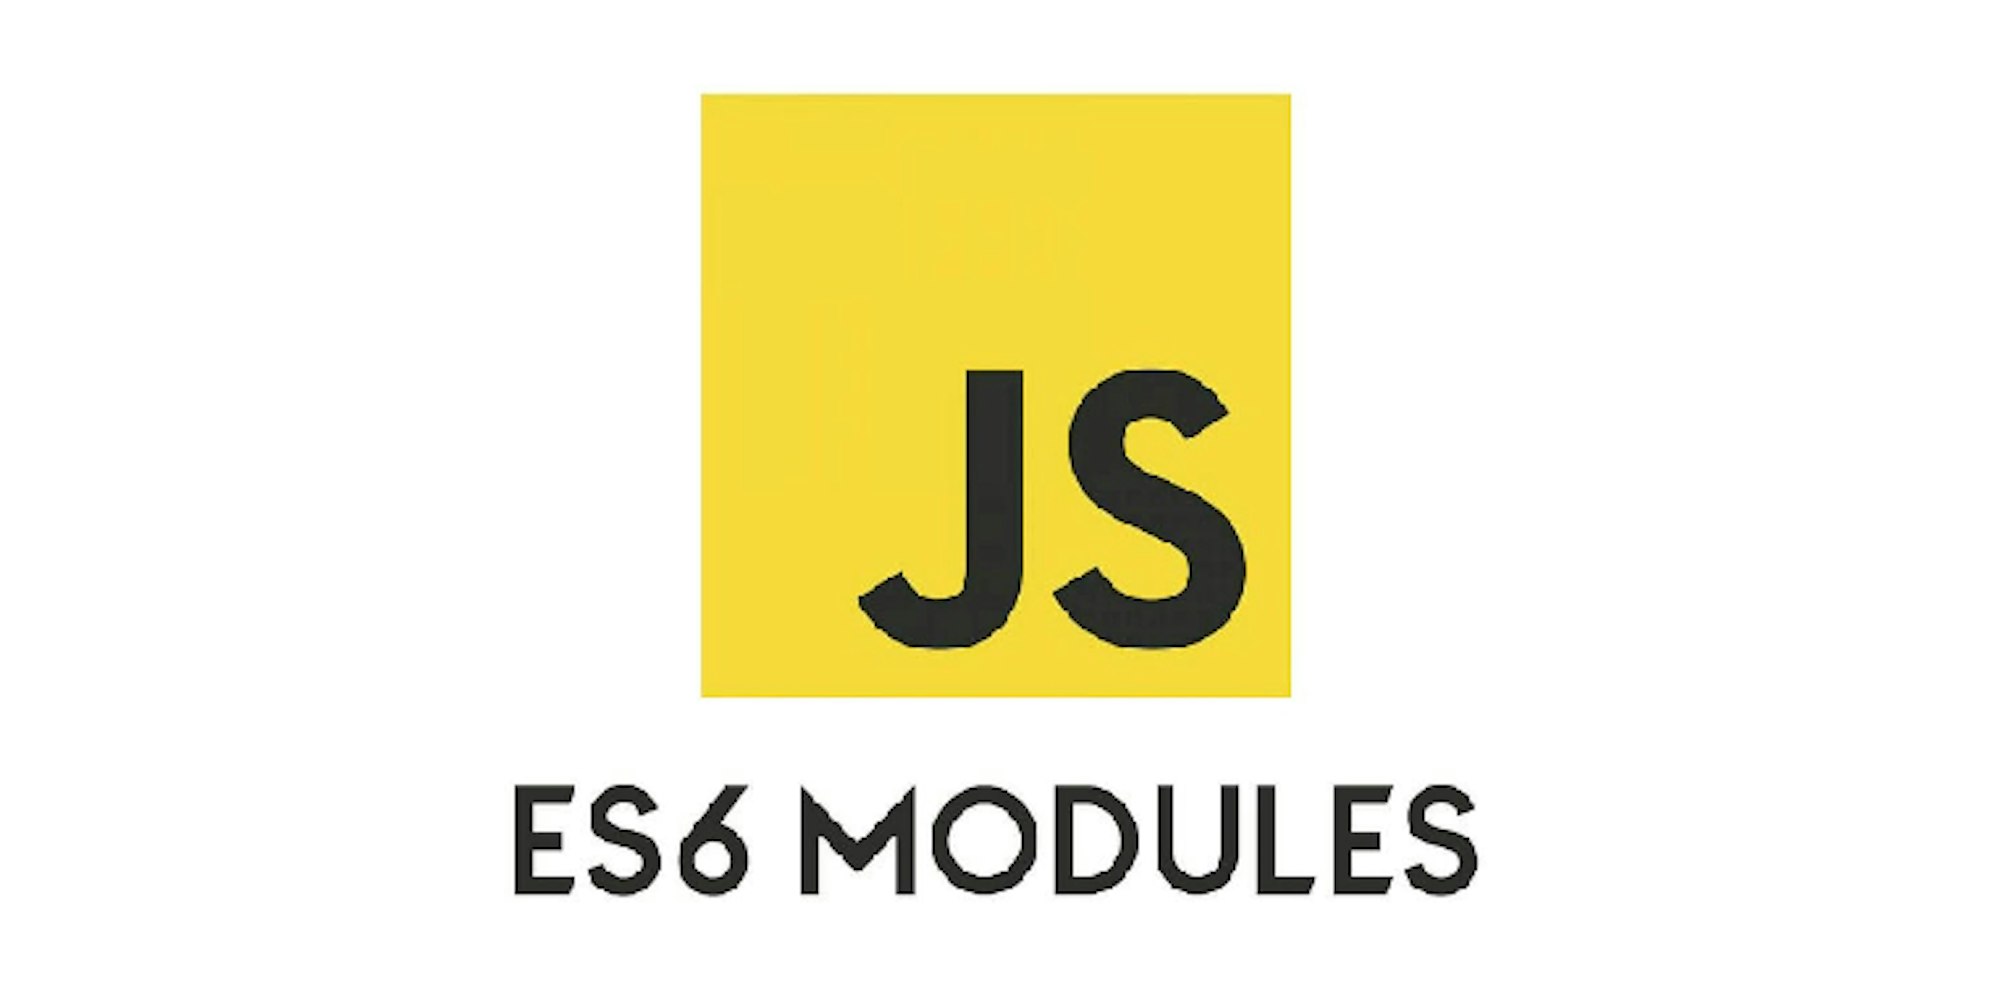 Cover Image for How to Harness the Power of ES6's Module System in Your JavaScript Project